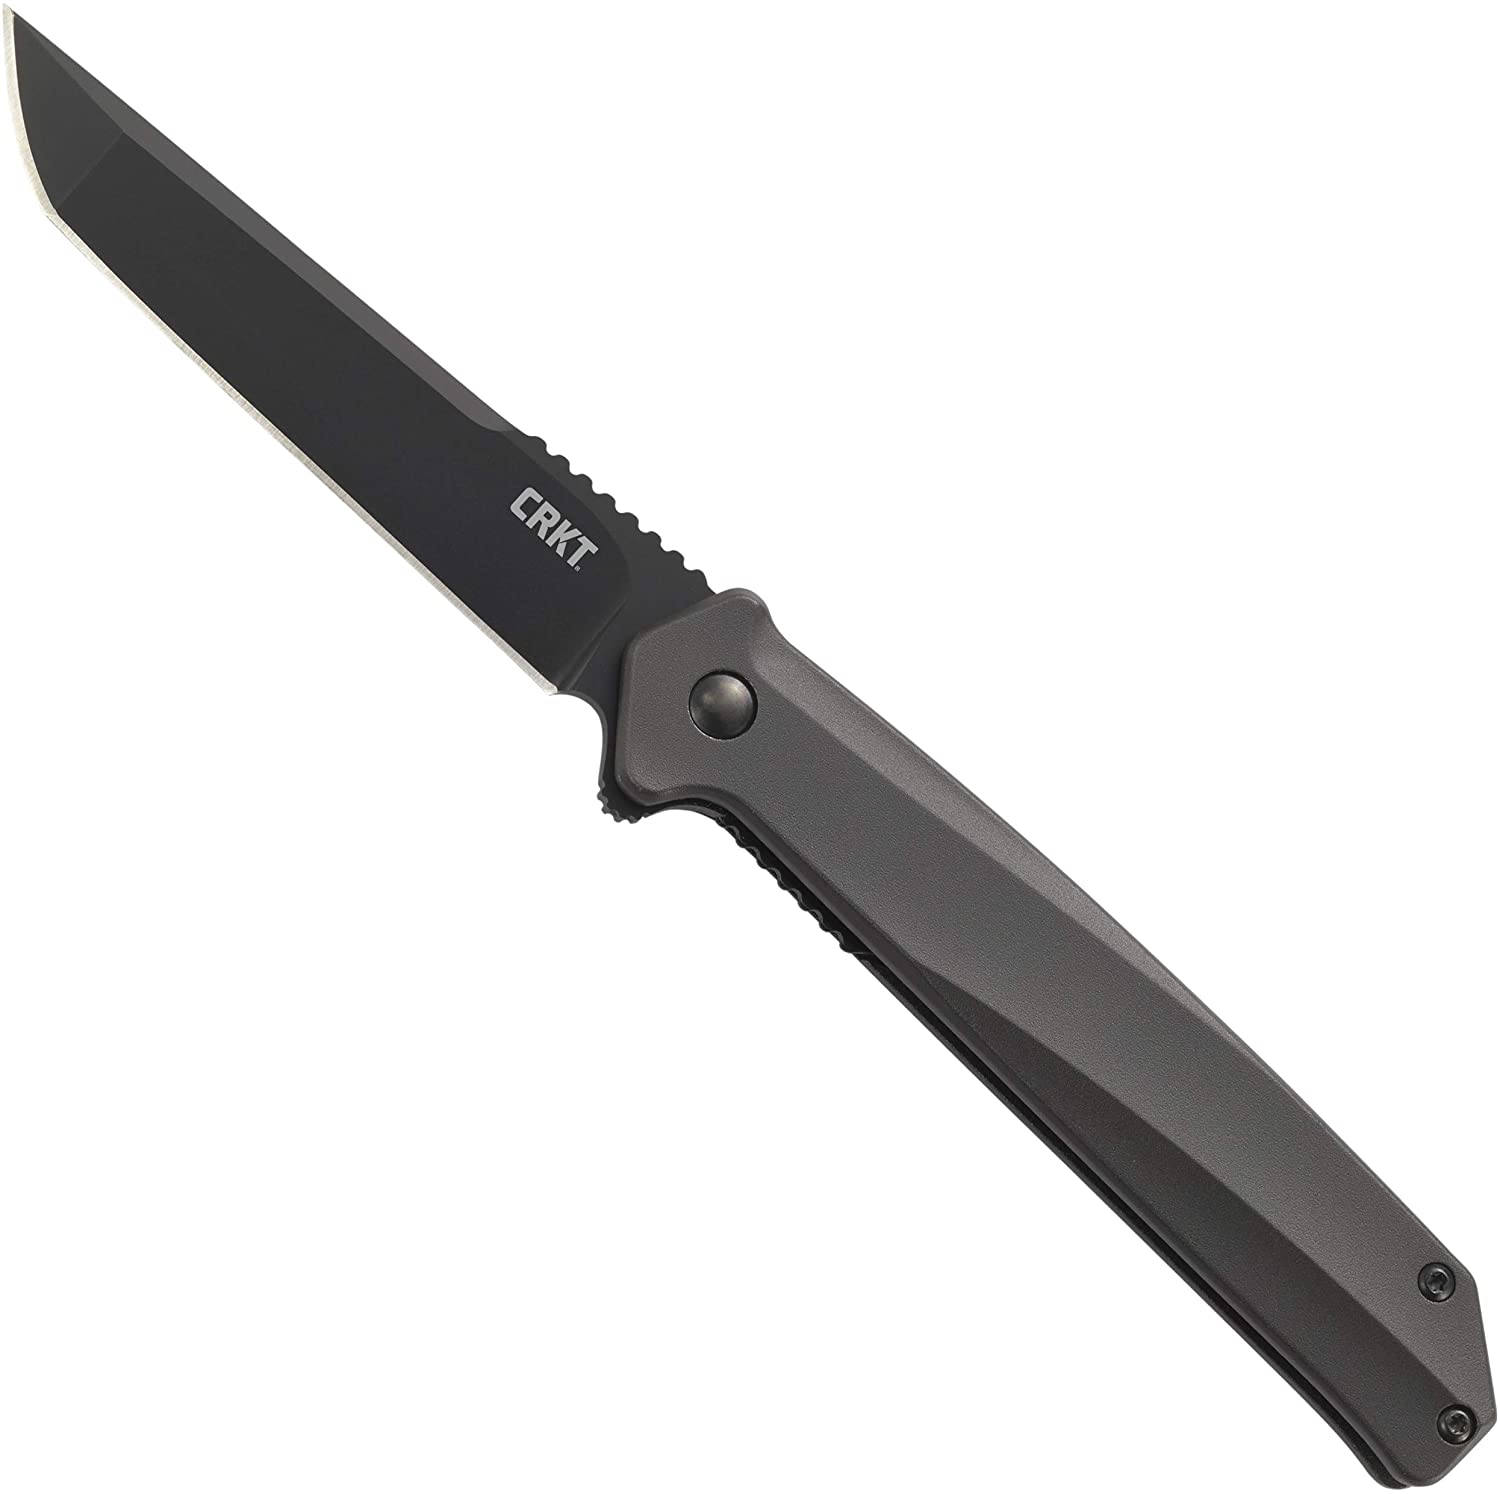 CRKT Helical Folding Knife (3.52 inch, D2, Tanto) $29.99